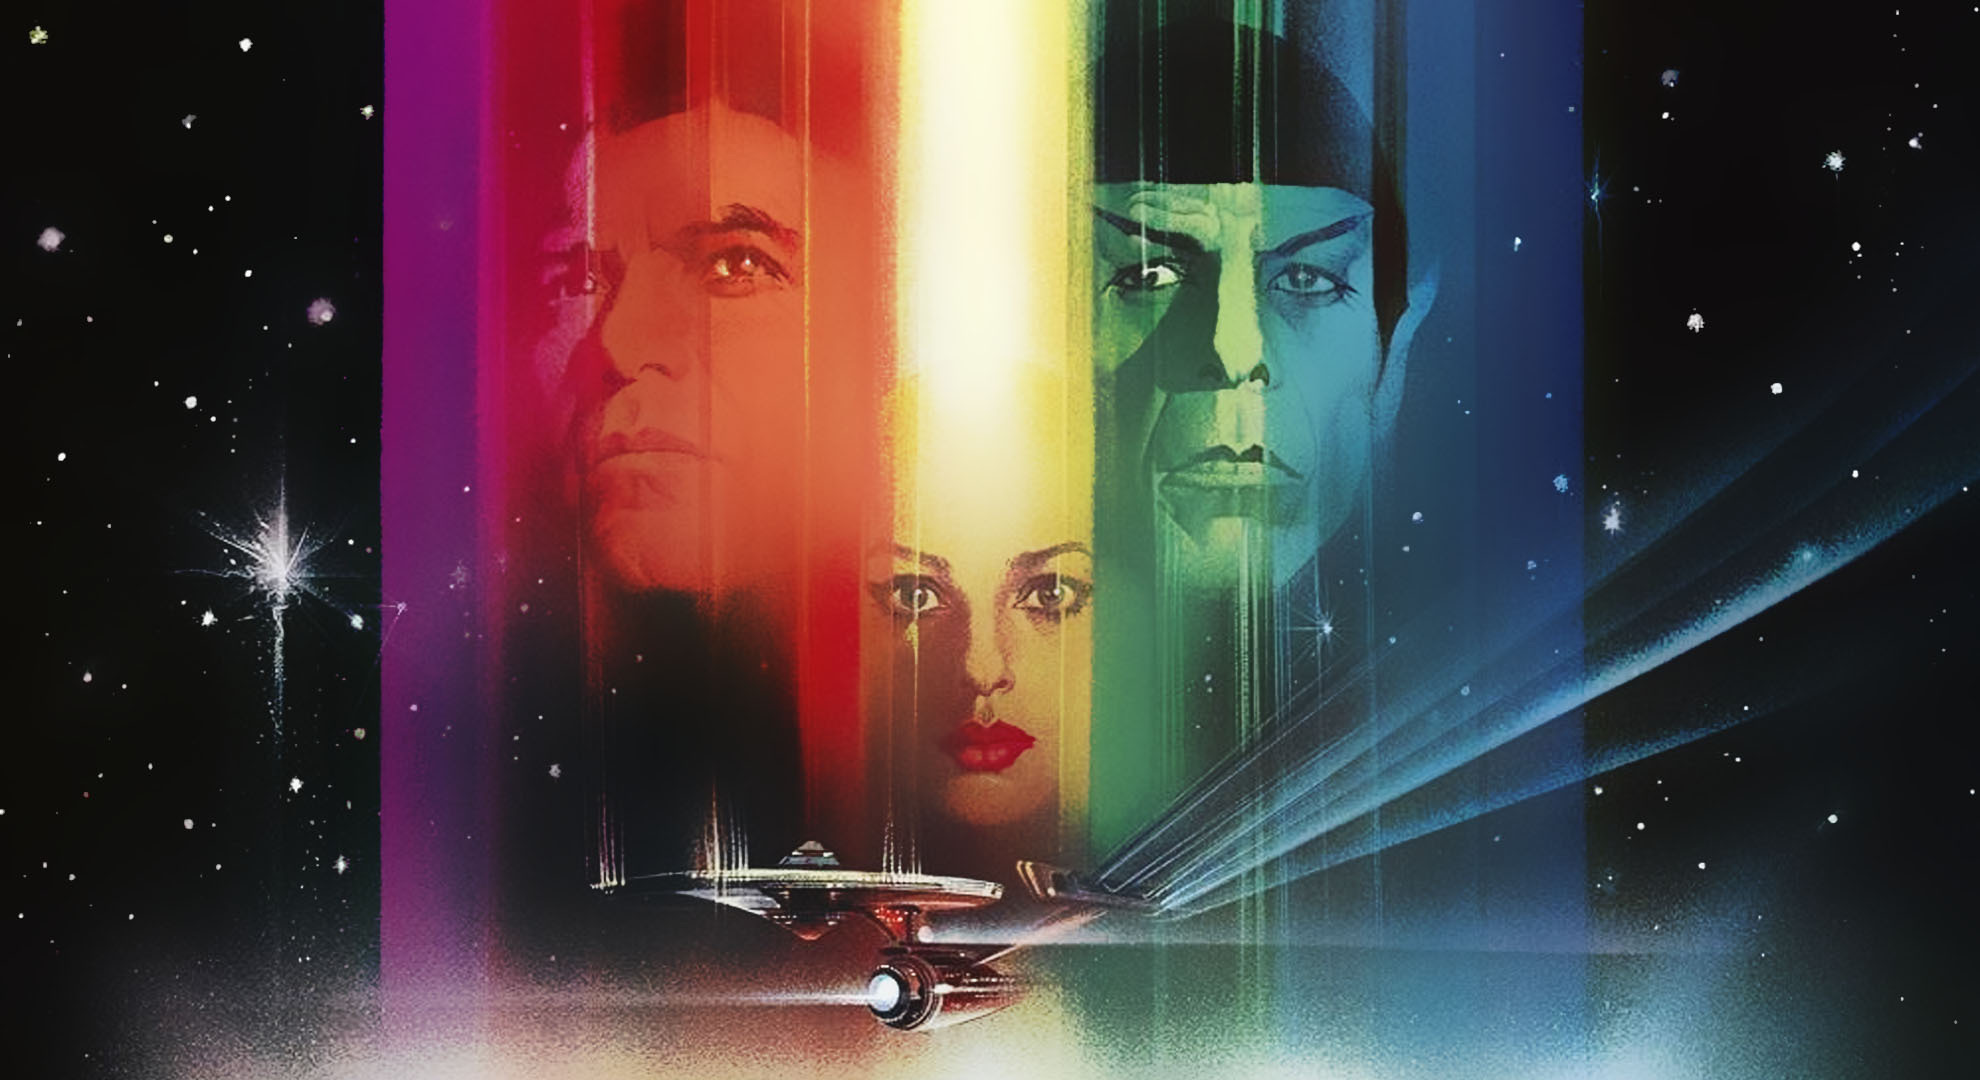 Movie Star Trek: The Motion Picture HD Wallpaper | Background Image